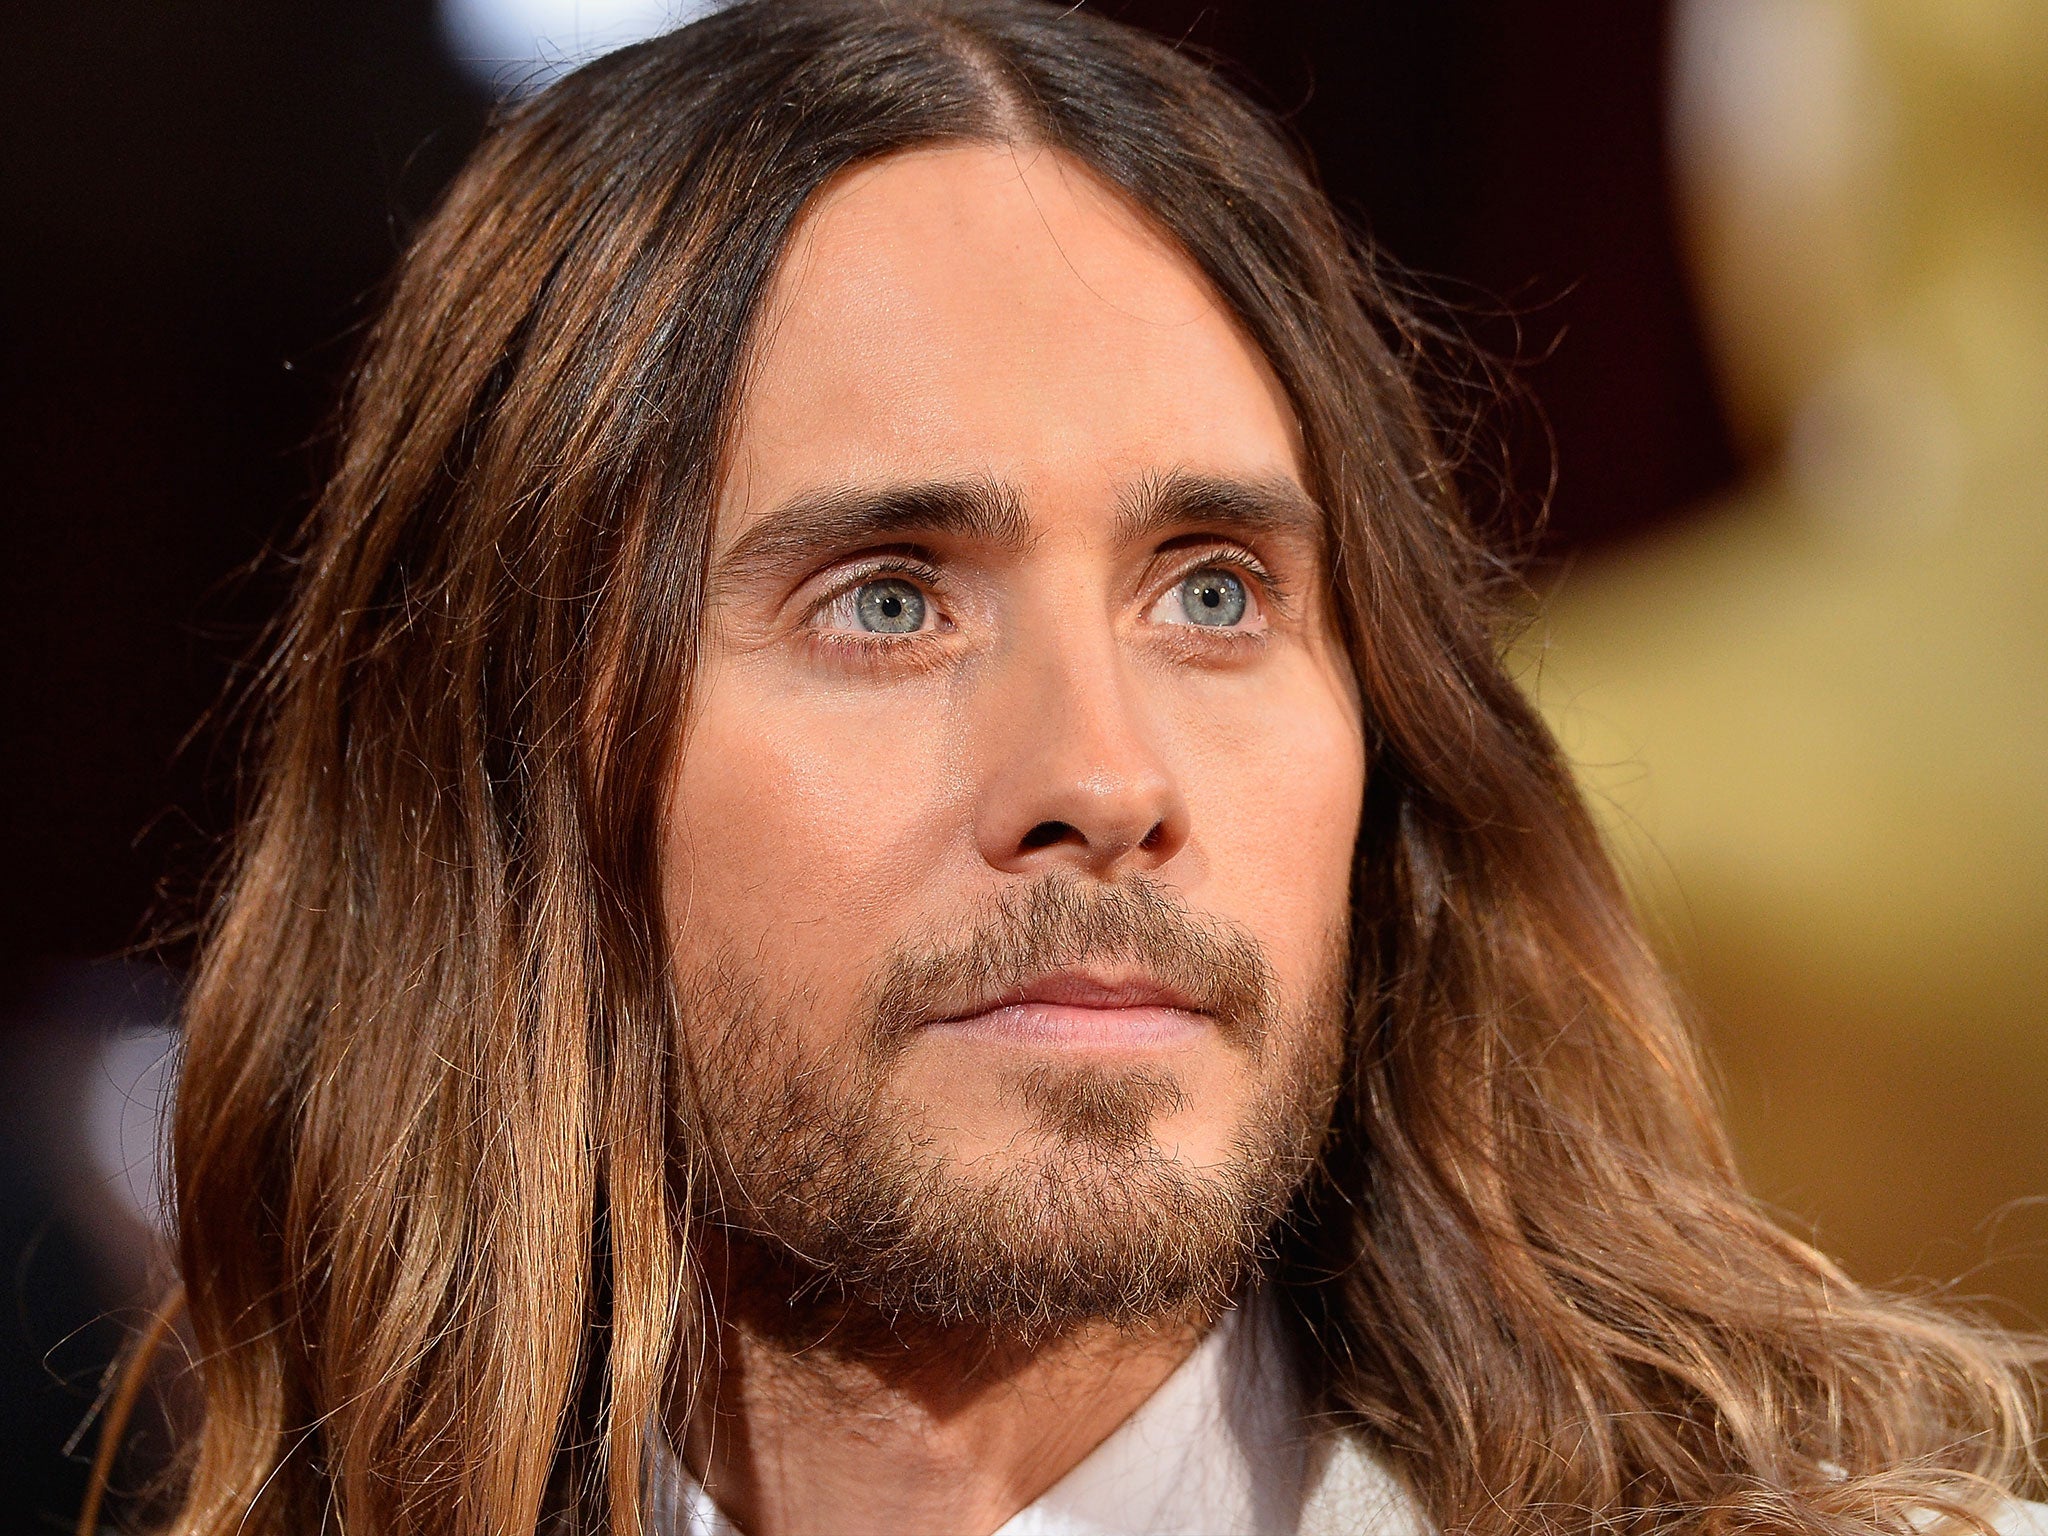 Hollywood actor Jared Leto backed Reddit in new fundraising round